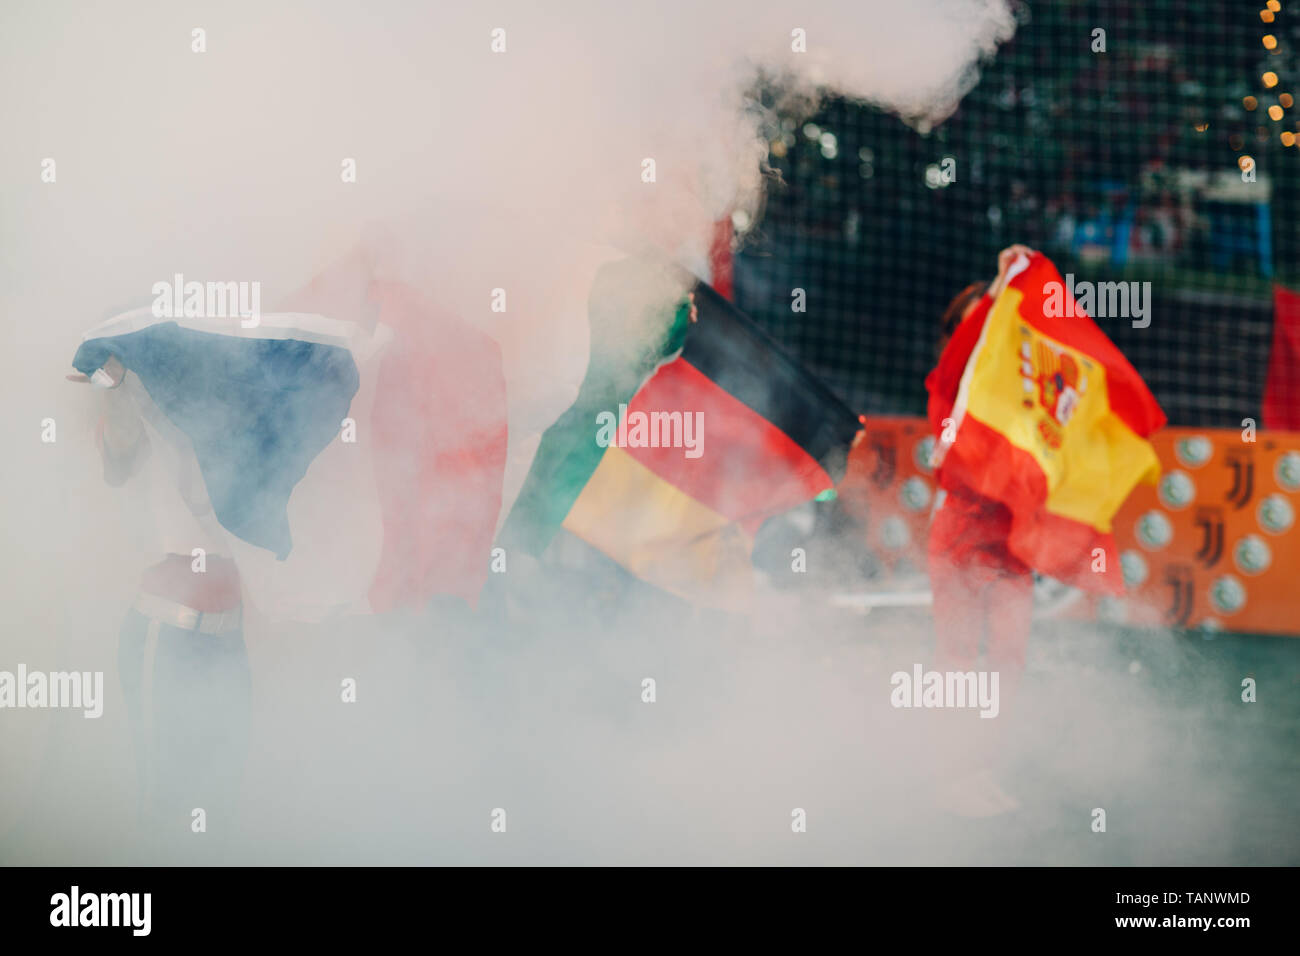 Flags Germany, Spain, France during a sports soccer match at a stadium in smoke Stock Photo